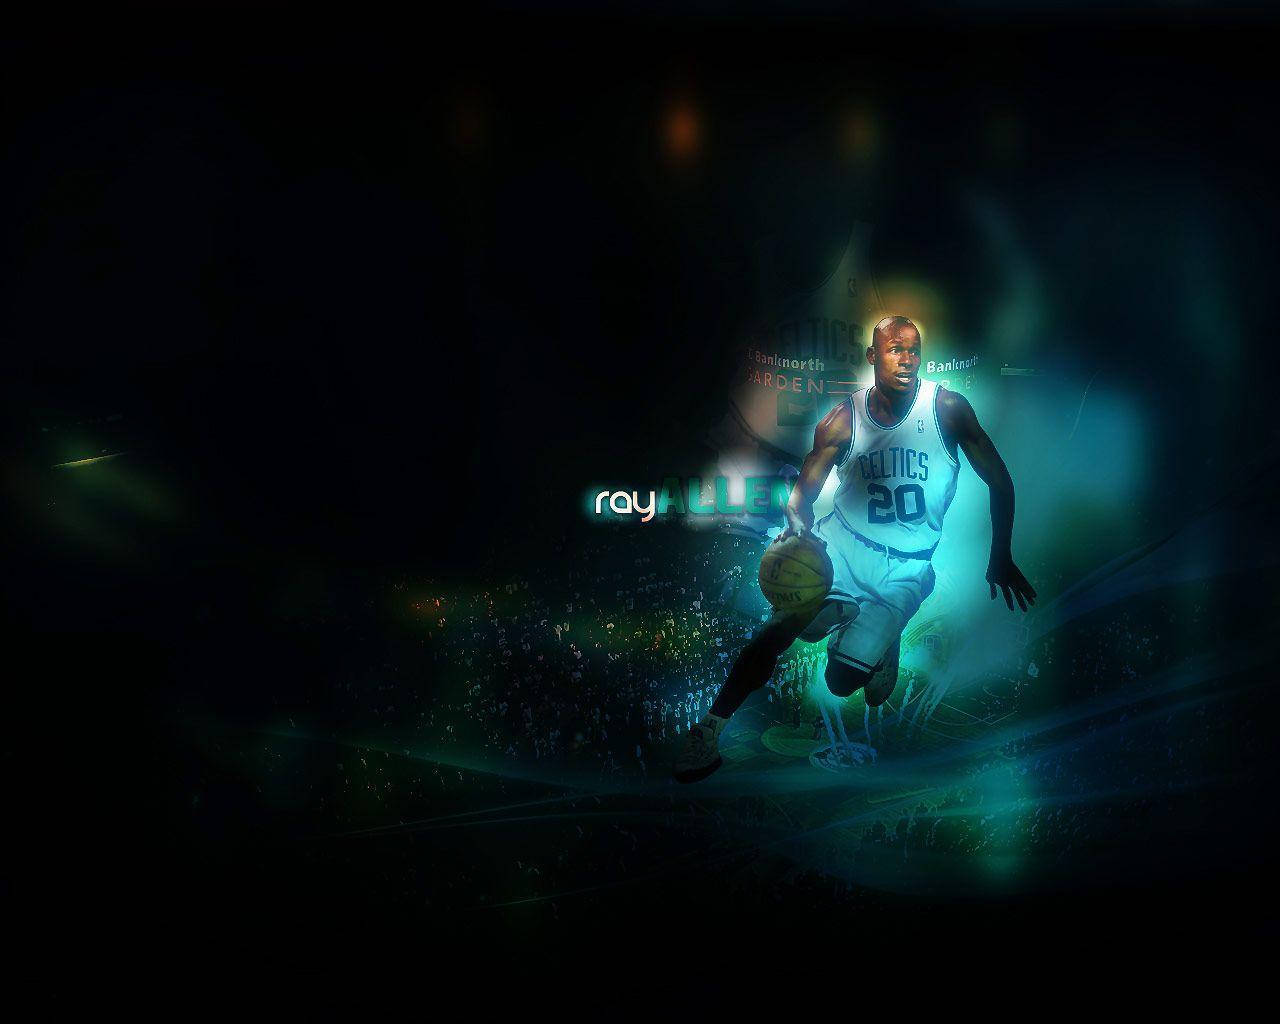 Glowing Ray Allen Background